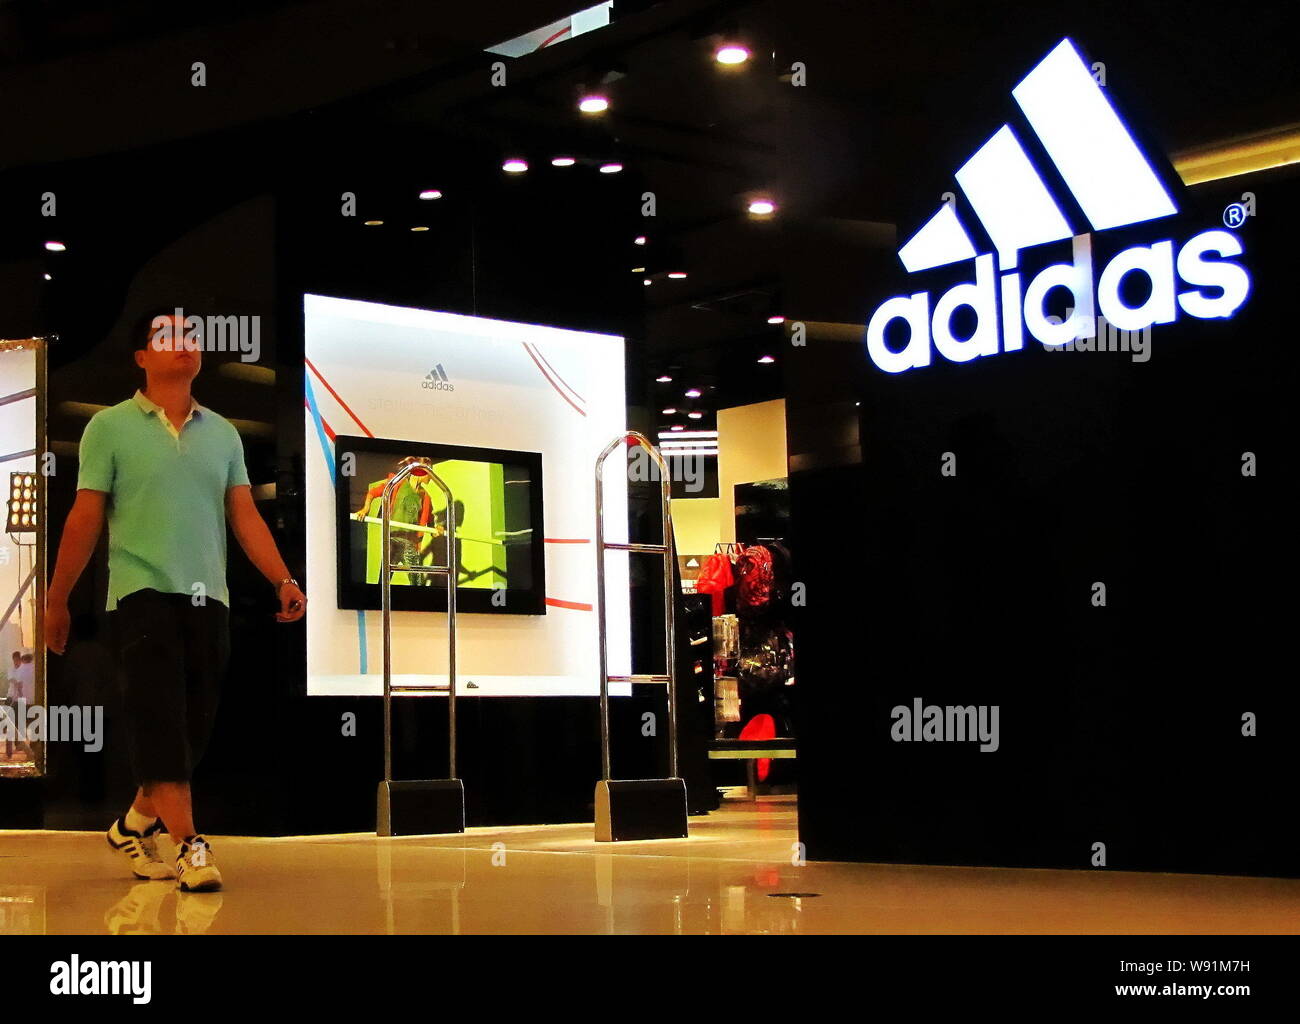 Adidas China Shanghai Office Address Orlando Online Sales, UP TO 66% OFF |  www.istruzionepotenza.it